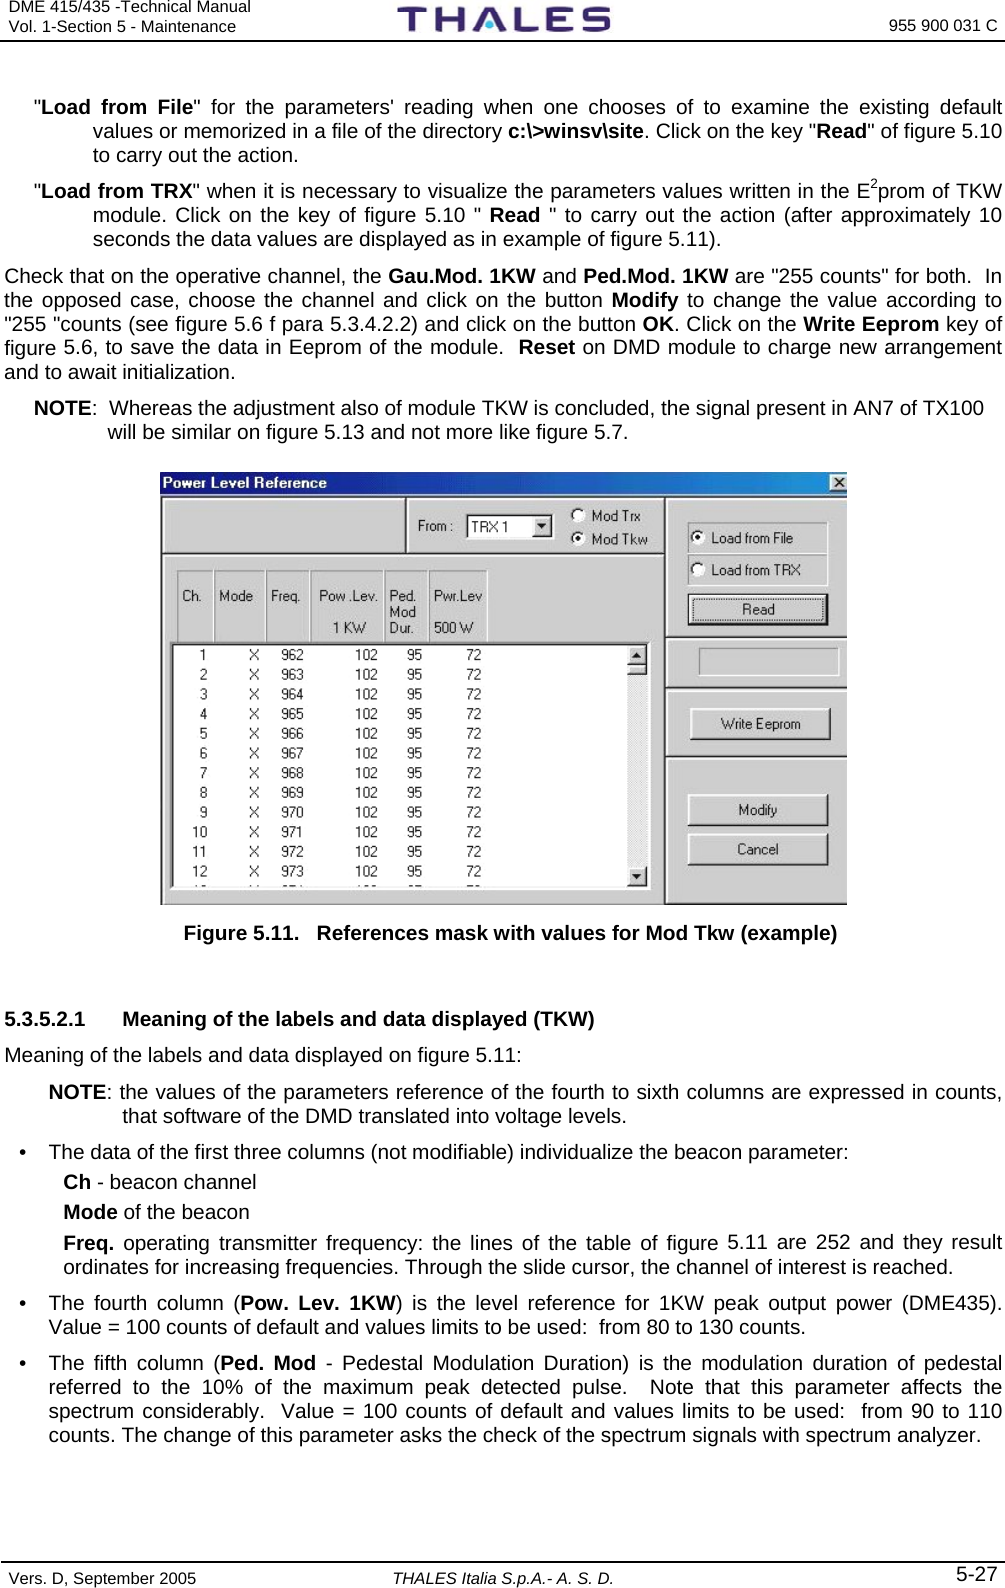 DME 415/435 -Technical Manual Vol. 1-Section 5 - Maintenance    955 900 031 C Vers. D, September 2005  THALES Italia S.p.A.- A. S. D. 5-27 &quot;Load from File&quot; for the parameters&apos; reading when one chooses of to examine the existing default values or memorized in a file of the directory c:\&gt;winsv\site. Click on the key &quot;Read&quot; of figure 5.10 to carry out the action.   &quot;Load from TRX&quot; when it is necessary to visualize the parameters values written in the E2prom of TKW module. Click on the key of figure 5.10 &quot; Read &quot; to carry out the action (after approximately 10 seconds the data values are displayed as in example of figure 5.11). Check that on the operative channel, the Gau.Mod. 1KW and Ped.Mod. 1KW are &quot;255 counts&quot; for both.  In the opposed case, choose the channel and click on the button Modify to change the value according to &quot;255 &quot;counts (see figure 5.6 f para 5.3.4.2.2) and click on the button OK. Click on the Write Eeprom key of figure 5.6, to save the data in Eeprom of the module.  Reset on DMD module to charge new arrangement and to await initialization.   NOTE:  Whereas the adjustment also of module TKW is concluded, the signal present in AN7 of TX100 will be similar on figure 5.13 and not more like figure 5.7.   Figure 5.11.  References mask with values for Mod Tkw (example)   5.3.5.2.1  Meaning of the labels and data displayed (TKW) Meaning of the labels and data displayed on figure 5.11: NOTE: the values of the parameters reference of the fourth to sixth columns are expressed in counts, that software of the DMD translated into voltage levels.  •  The data of the first three columns (not modifiable) individualize the beacon parameter: Ch - beacon channel  Mode of the beacon Freq. operating transmitter frequency: the lines of the table of figure 5.11 are 252 and they result ordinates for increasing frequencies. Through the slide cursor, the channel of interest is reached. •  The fourth column (Pow. Lev. 1KW) is the level reference for 1KW peak output power (DME435).  Value = 100 counts of default and values limits to be used:  from 80 to 130 counts. •  The fifth column (Ped. Mod - Pedestal Modulation Duration) is the modulation duration of pedestal referred to the 10% of the maximum peak detected pulse.  Note that this parameter affects the spectrum considerably.  Value = 100 counts of default and values limits to be used:  from 90 to 110 counts. The change of this parameter asks the check of the spectrum signals with spectrum analyzer.  